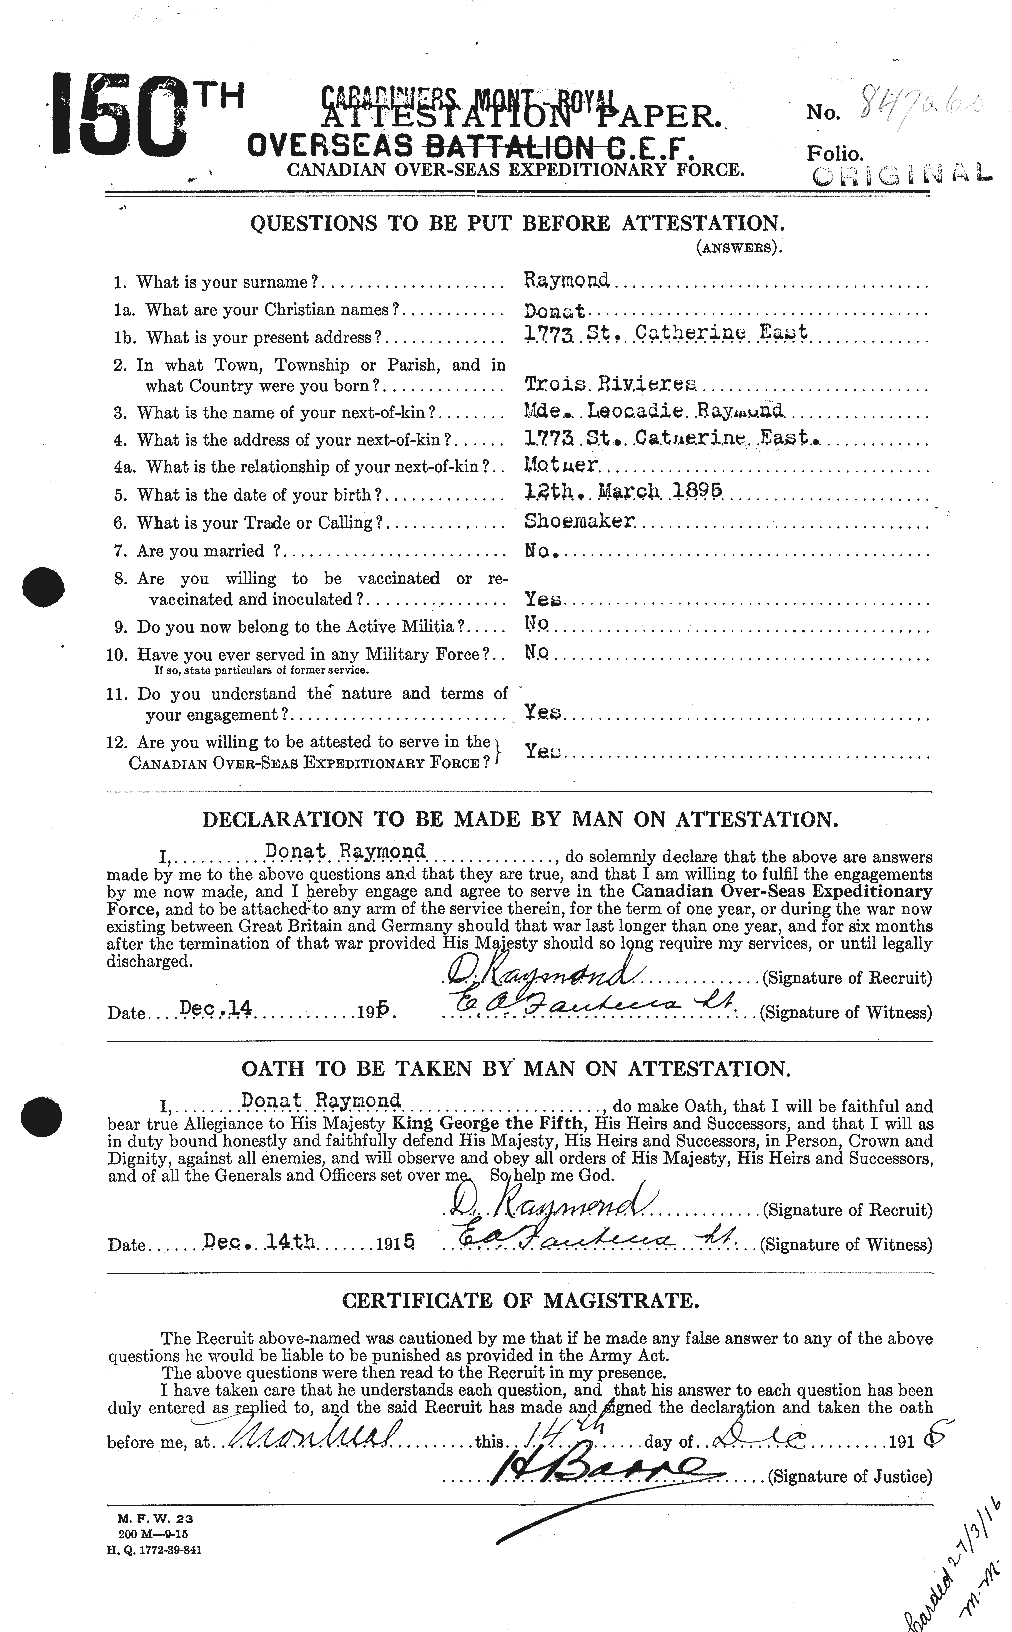 Personnel Records of the First World War - CEF 595298a